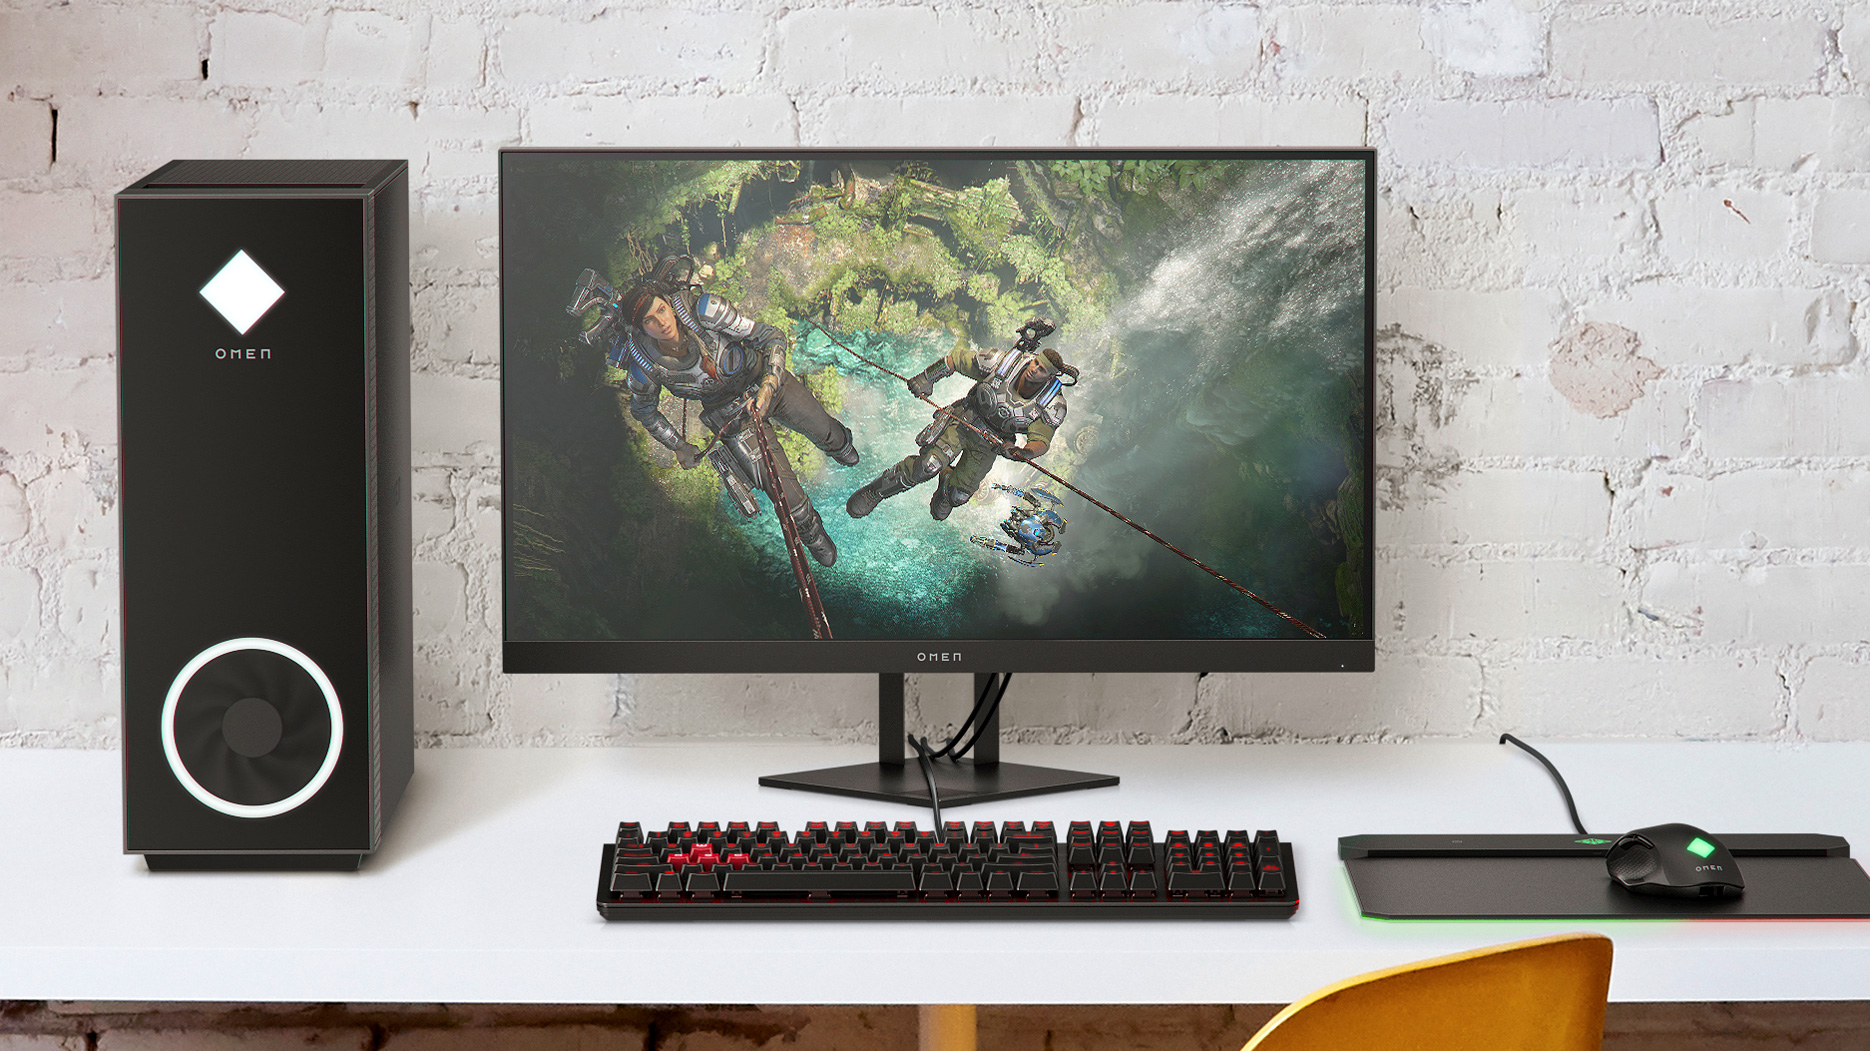 HP Omen 27i gaming monitor on a desk